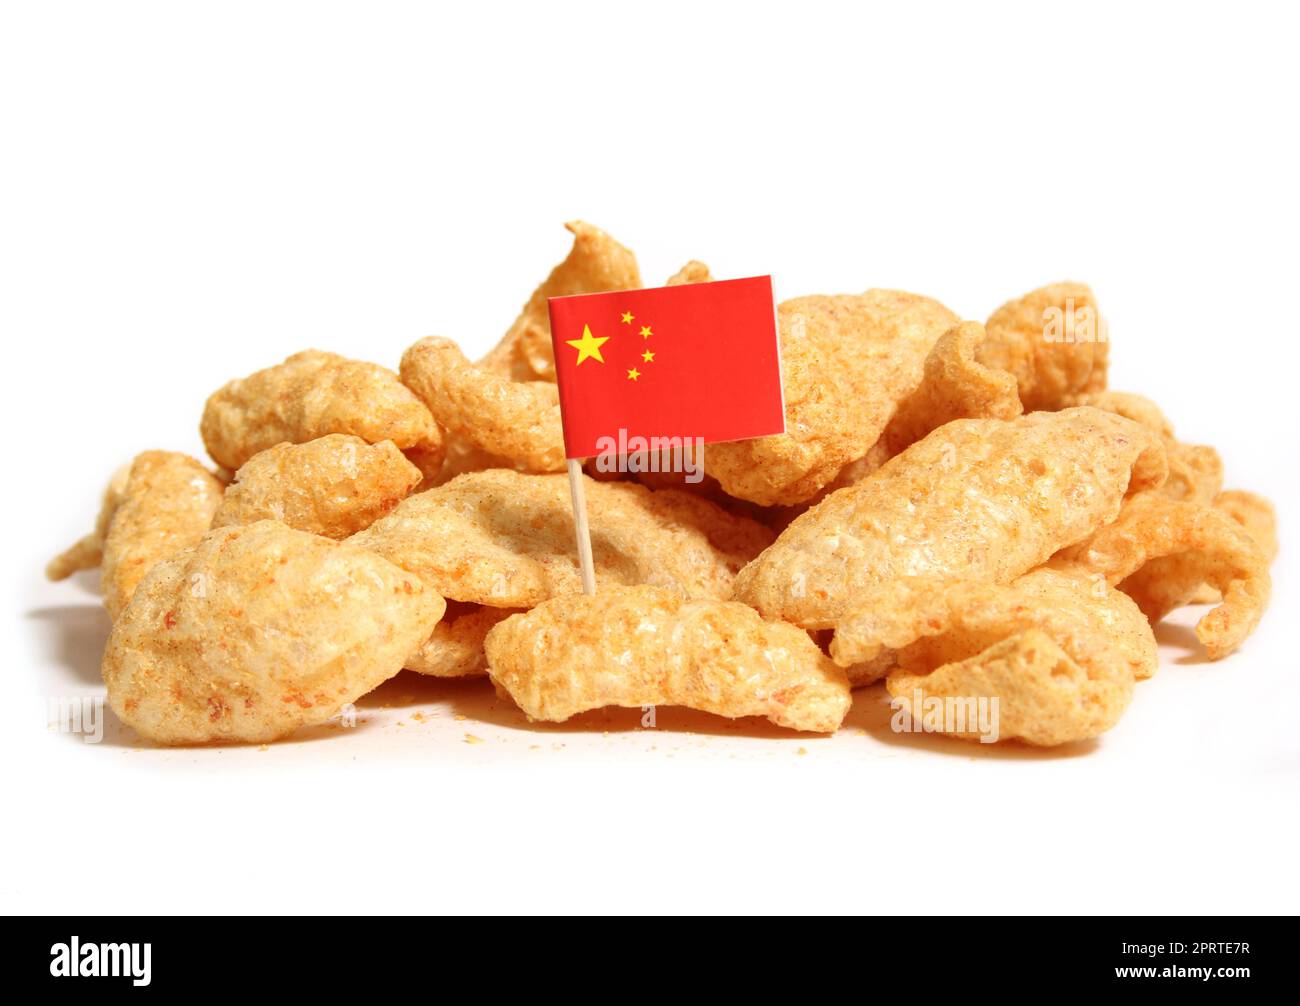 Fried Pork Skins With Flag of China on White Background Stock Photo